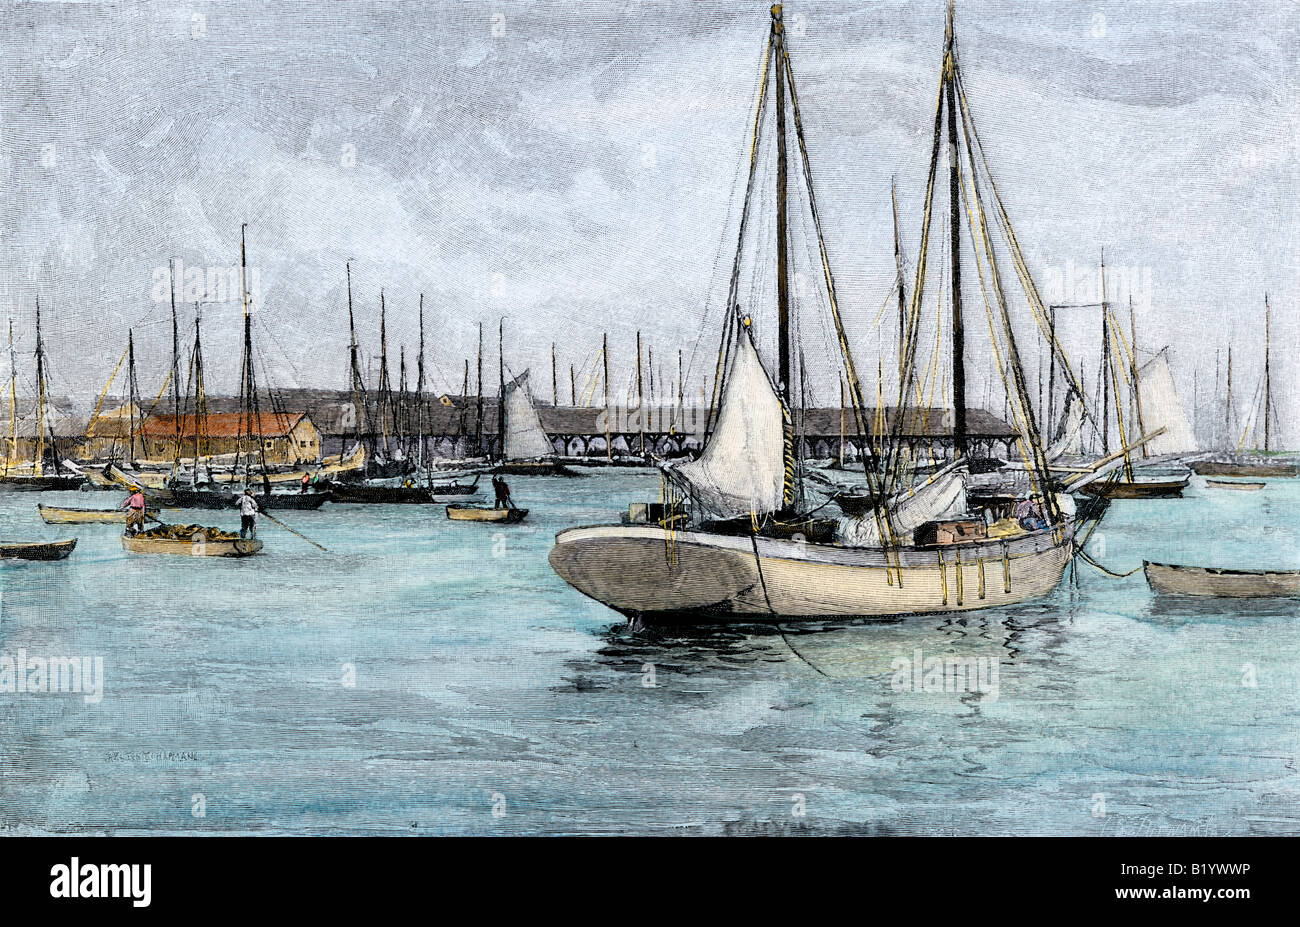 Sponge-fishing boats in Key West harbor 1890s. Hand-colored halftone of an illustration Stock Photo